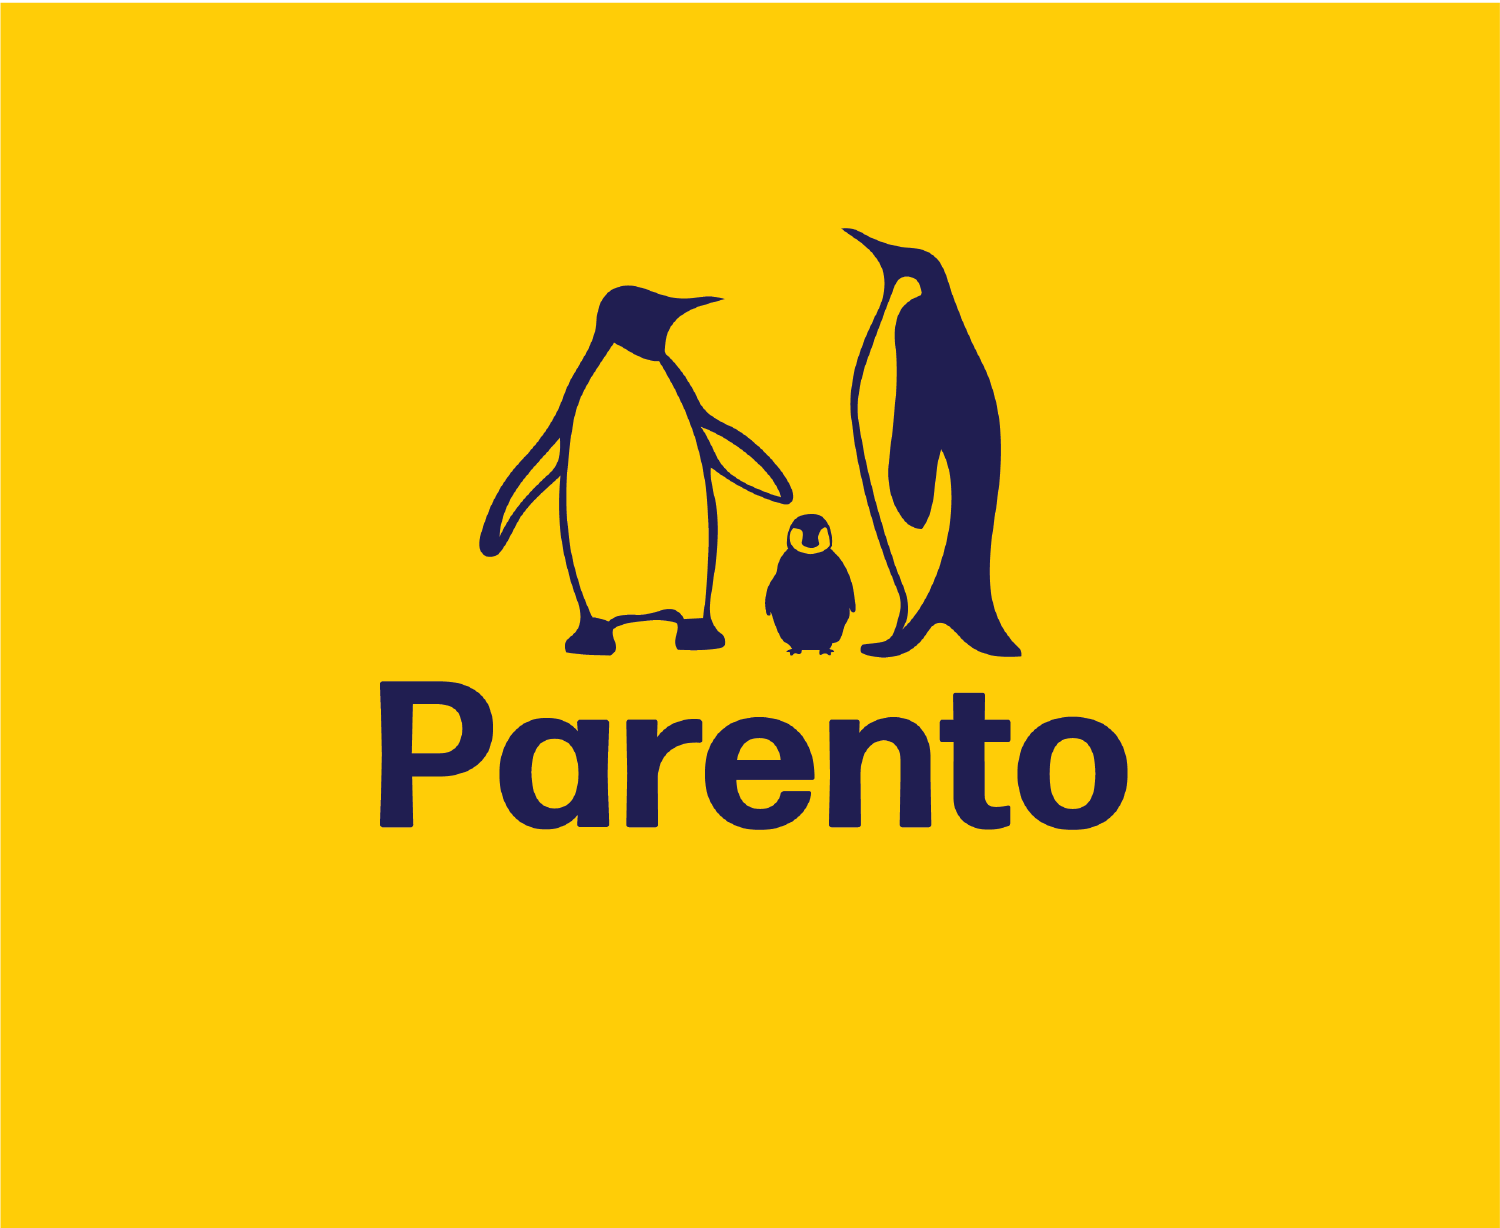 Parento is the only business solution for paid parental leave.